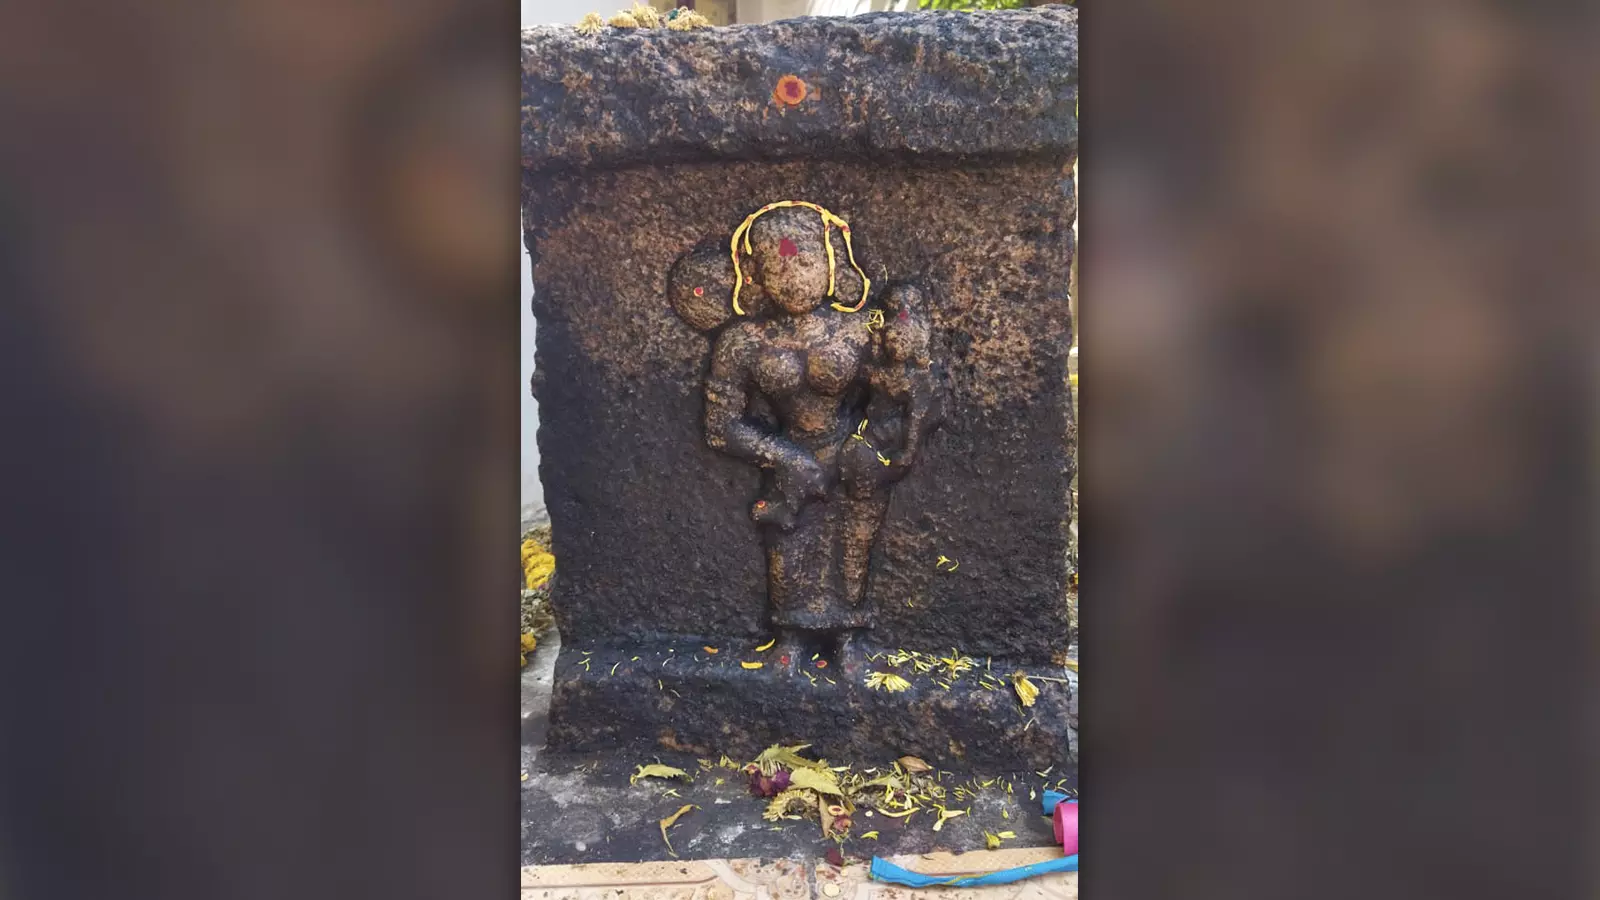 A heroine stone, showing a woman and child, which is worshipped. Villagers of Madurais Yanaimalai worship this structure as Andal. Experts, on the other hand, claim this structure was erected for a woman who died along with the child.